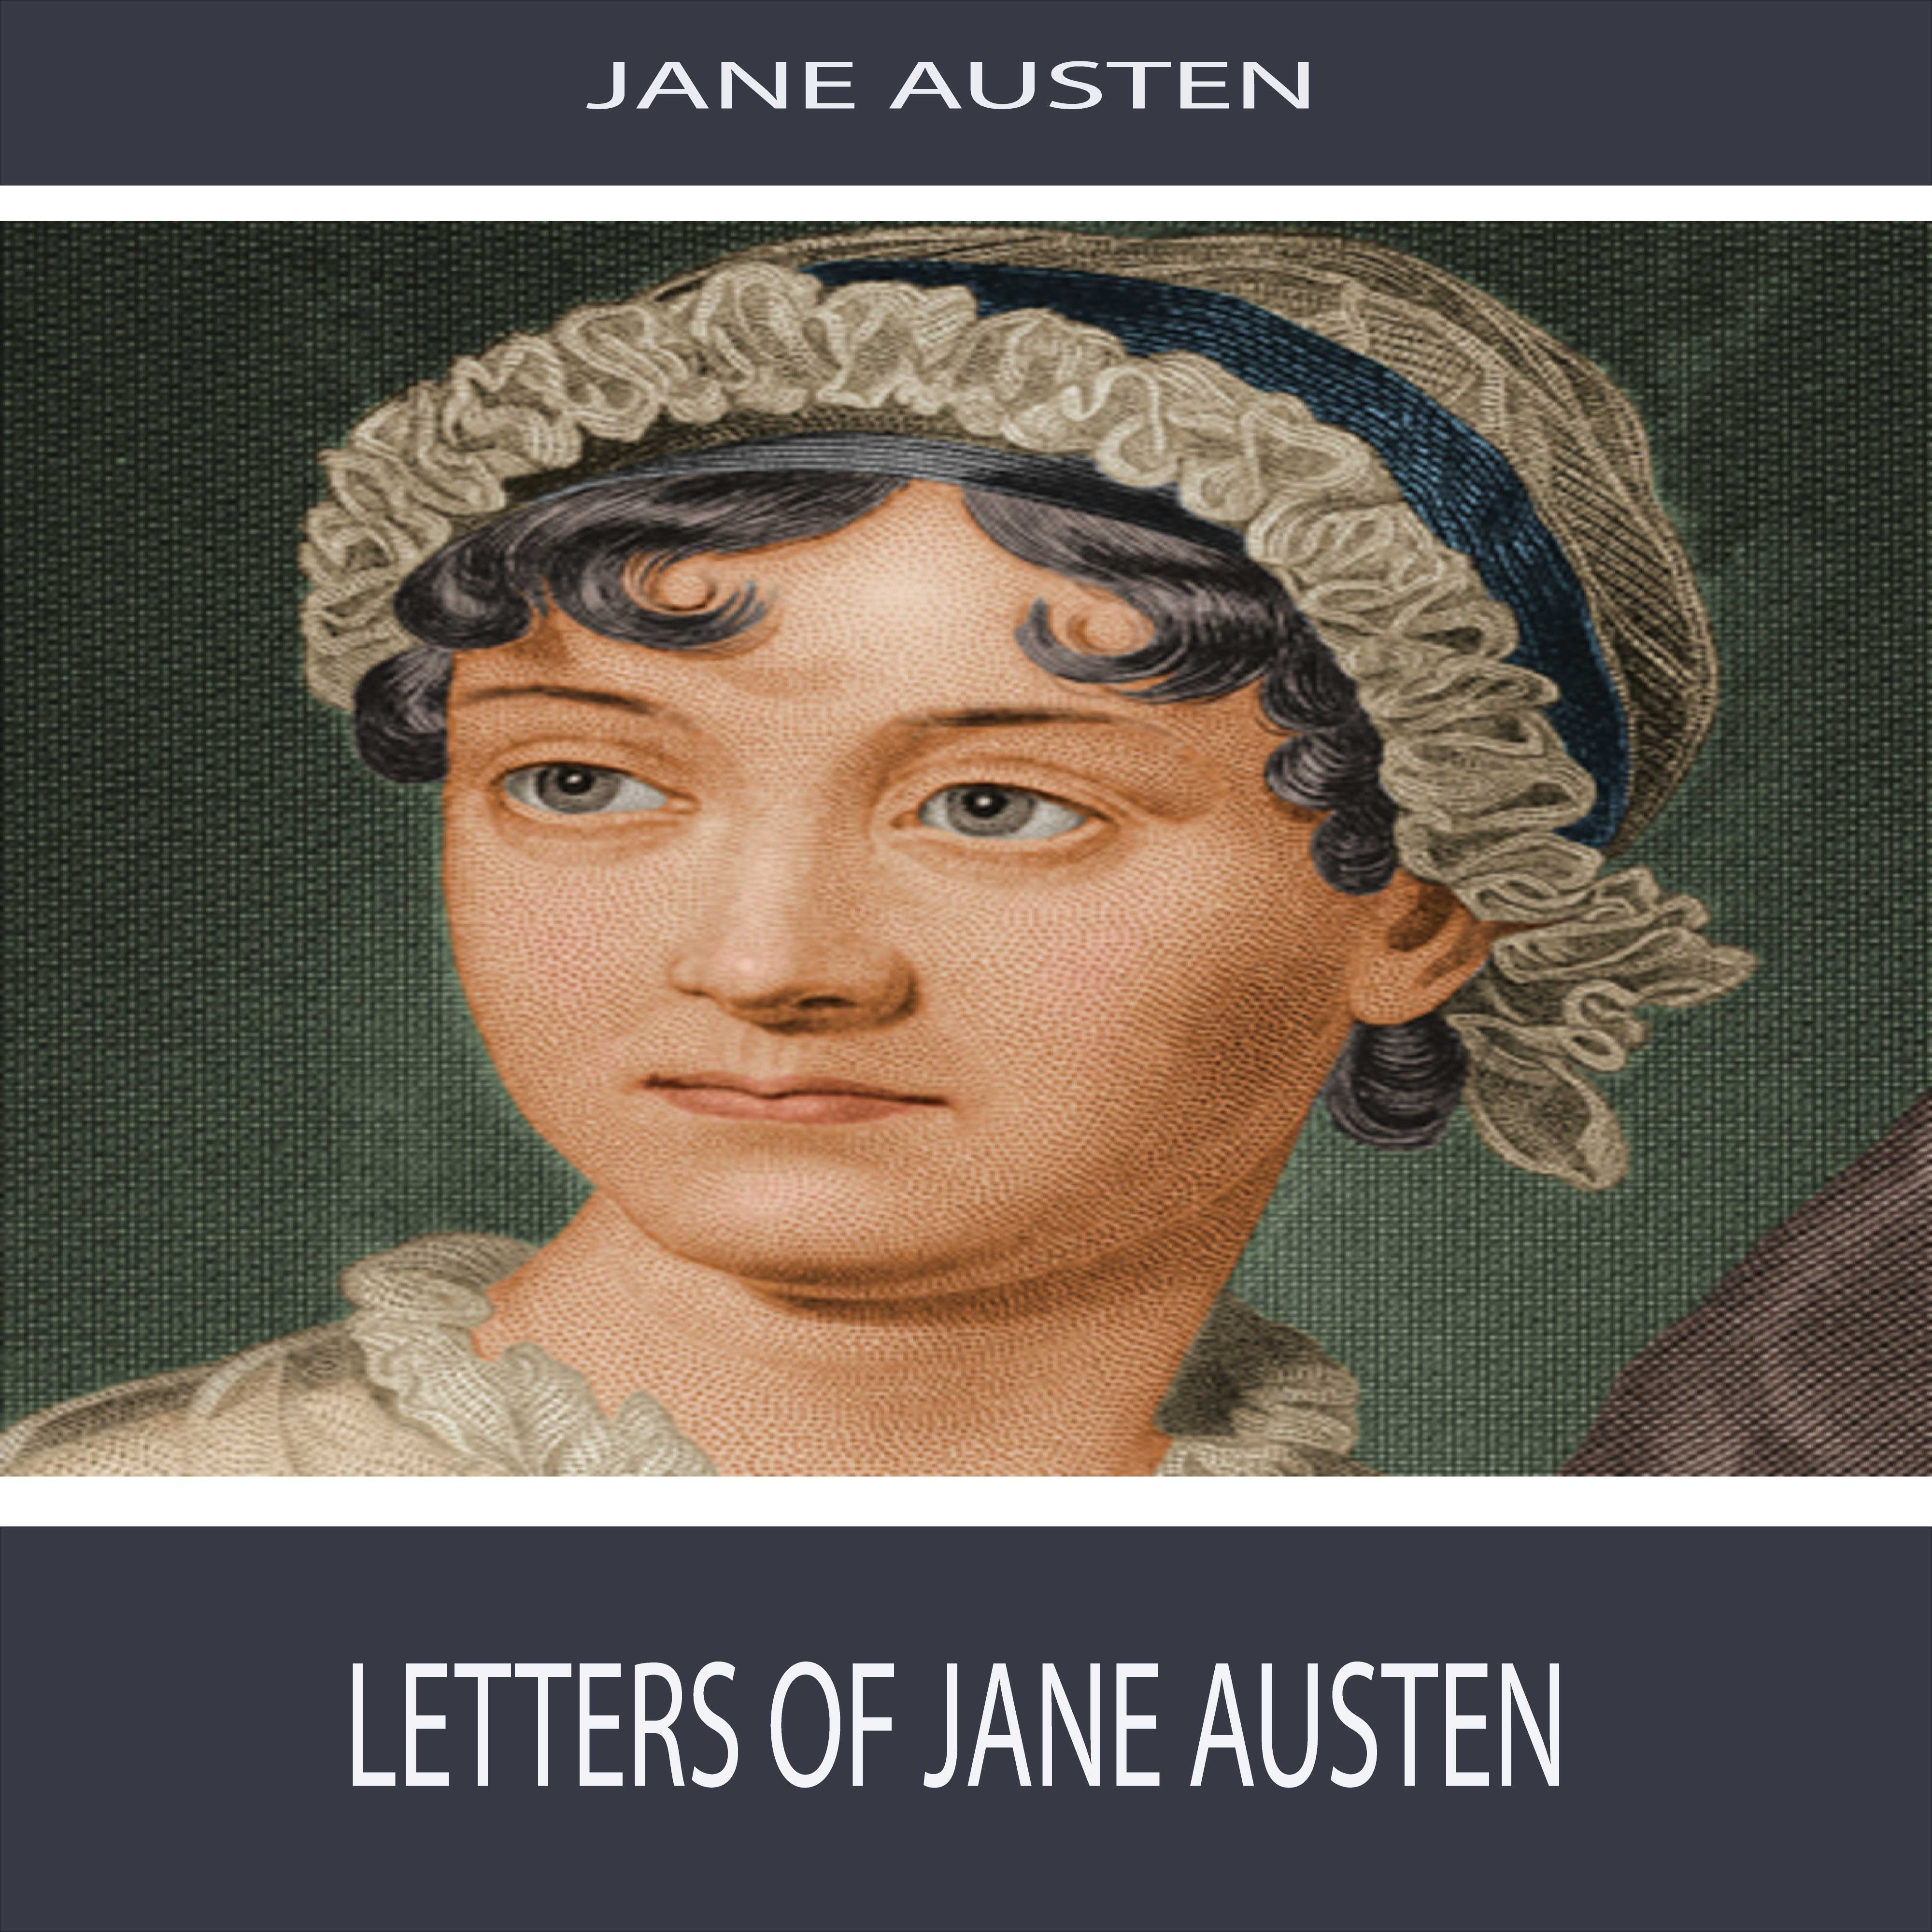 Letters of Jane Austen: Section 18